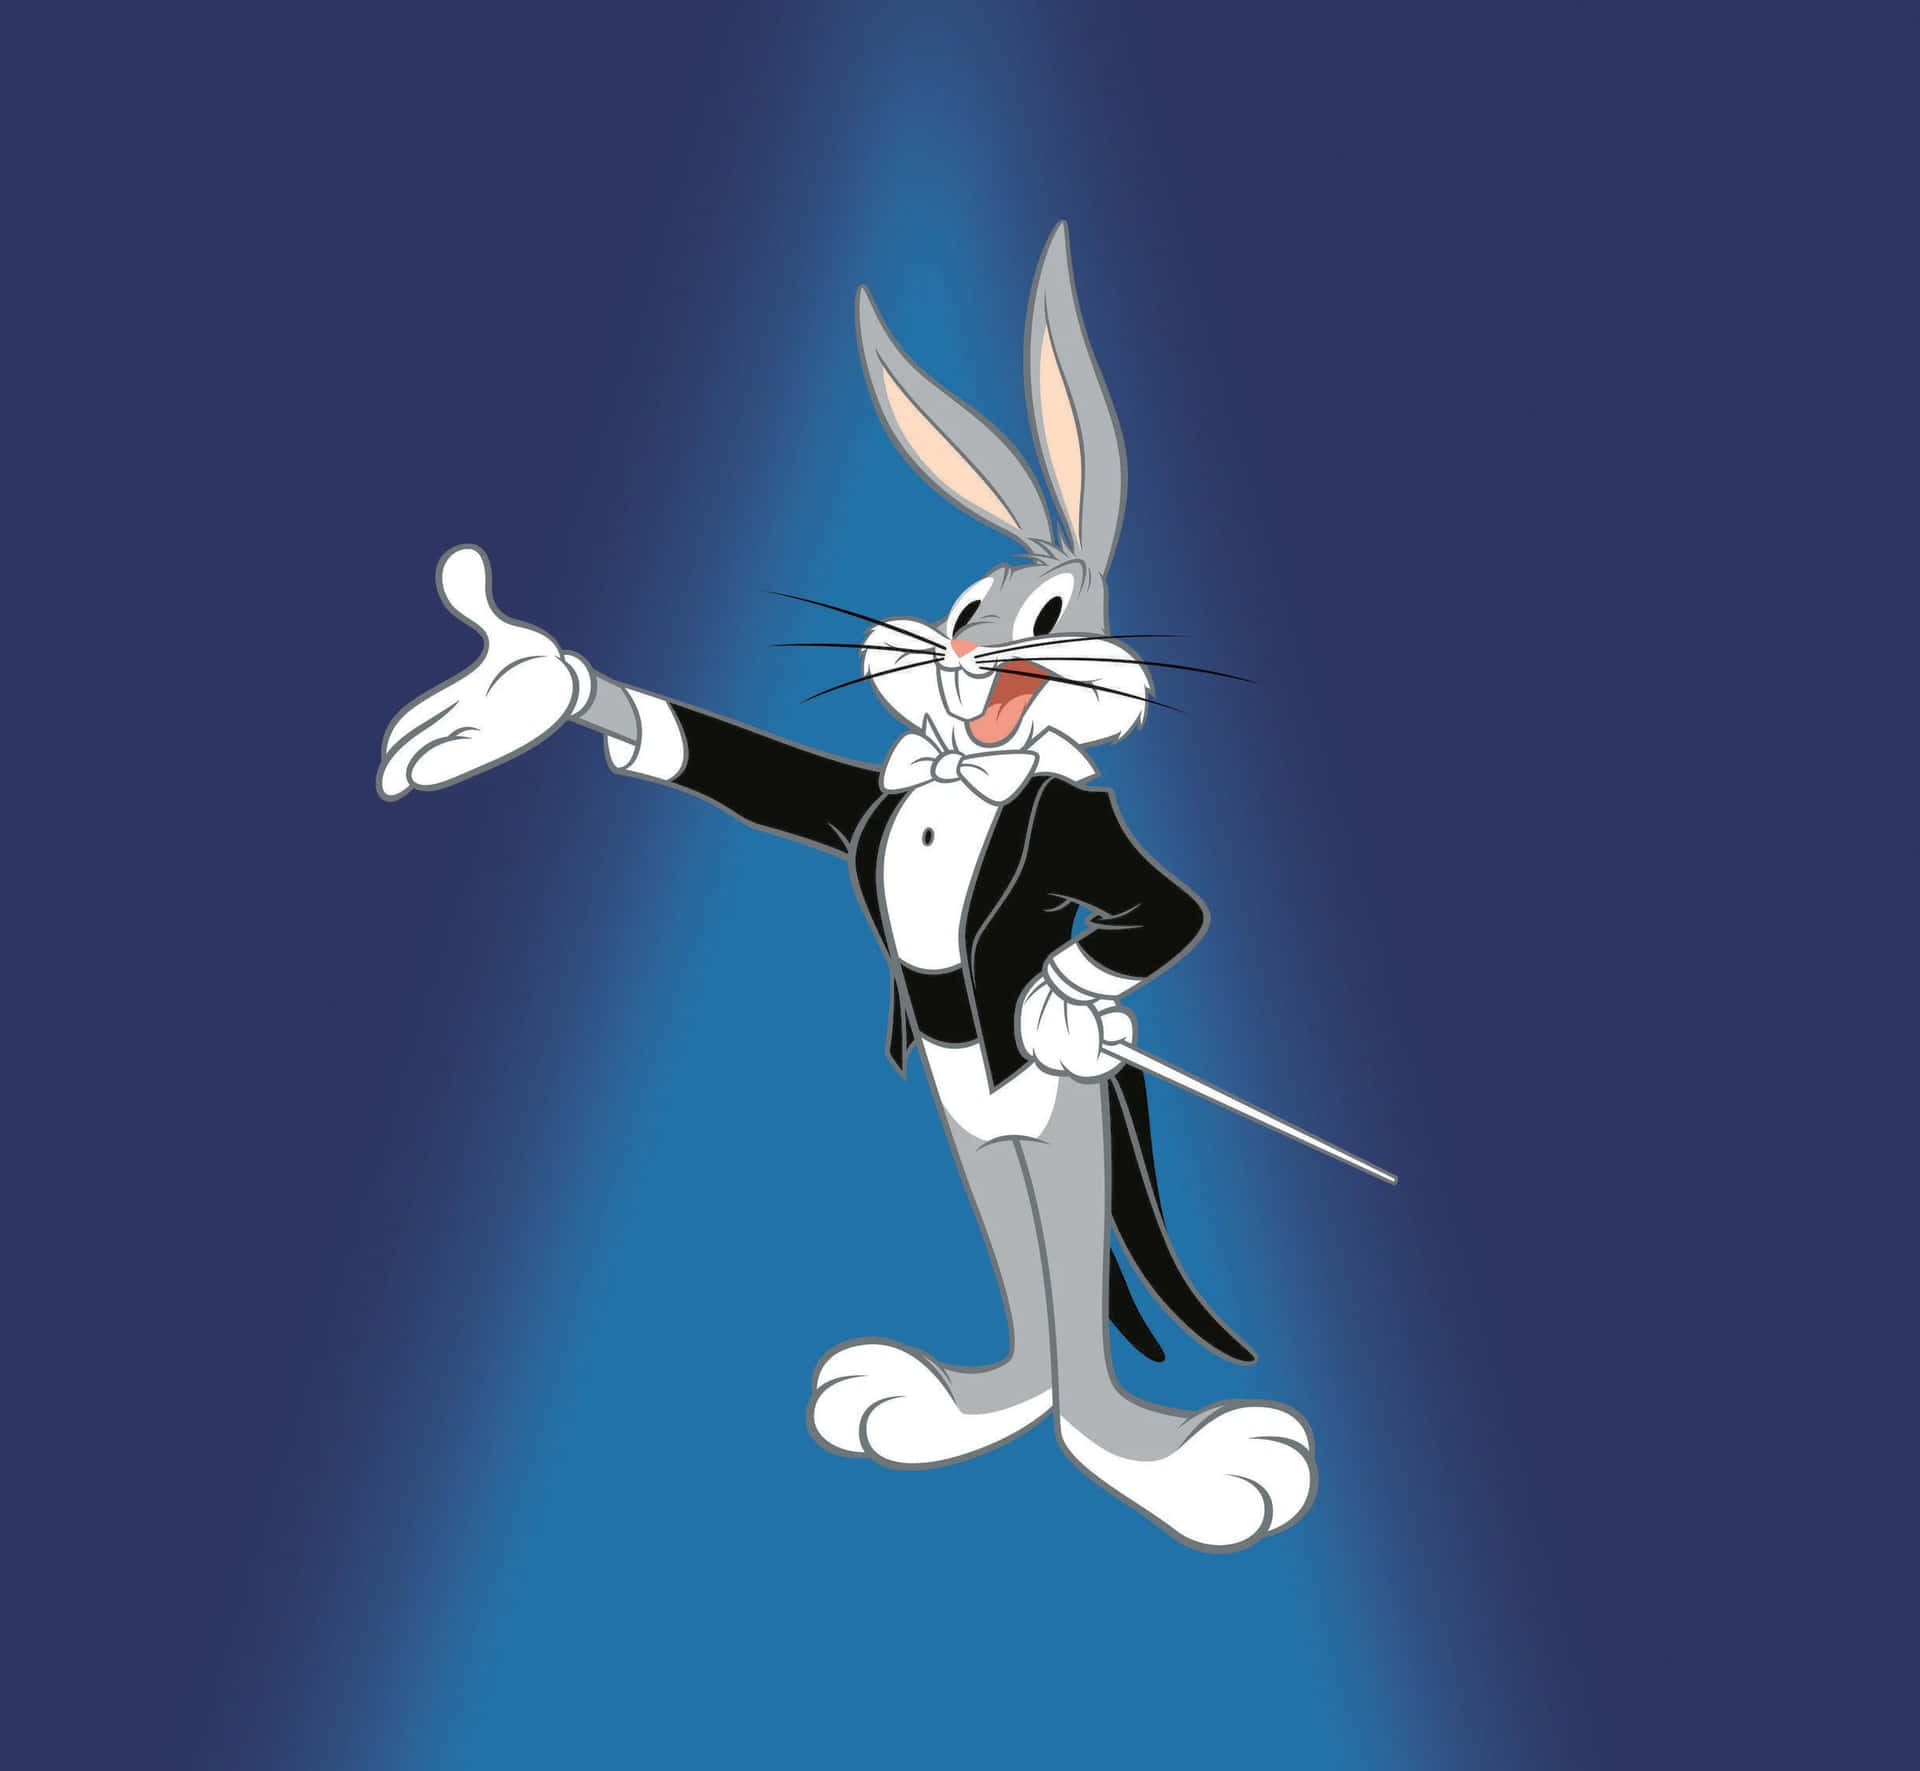 Iconic Cartoon Character Buggs Bunny In Natural Environment